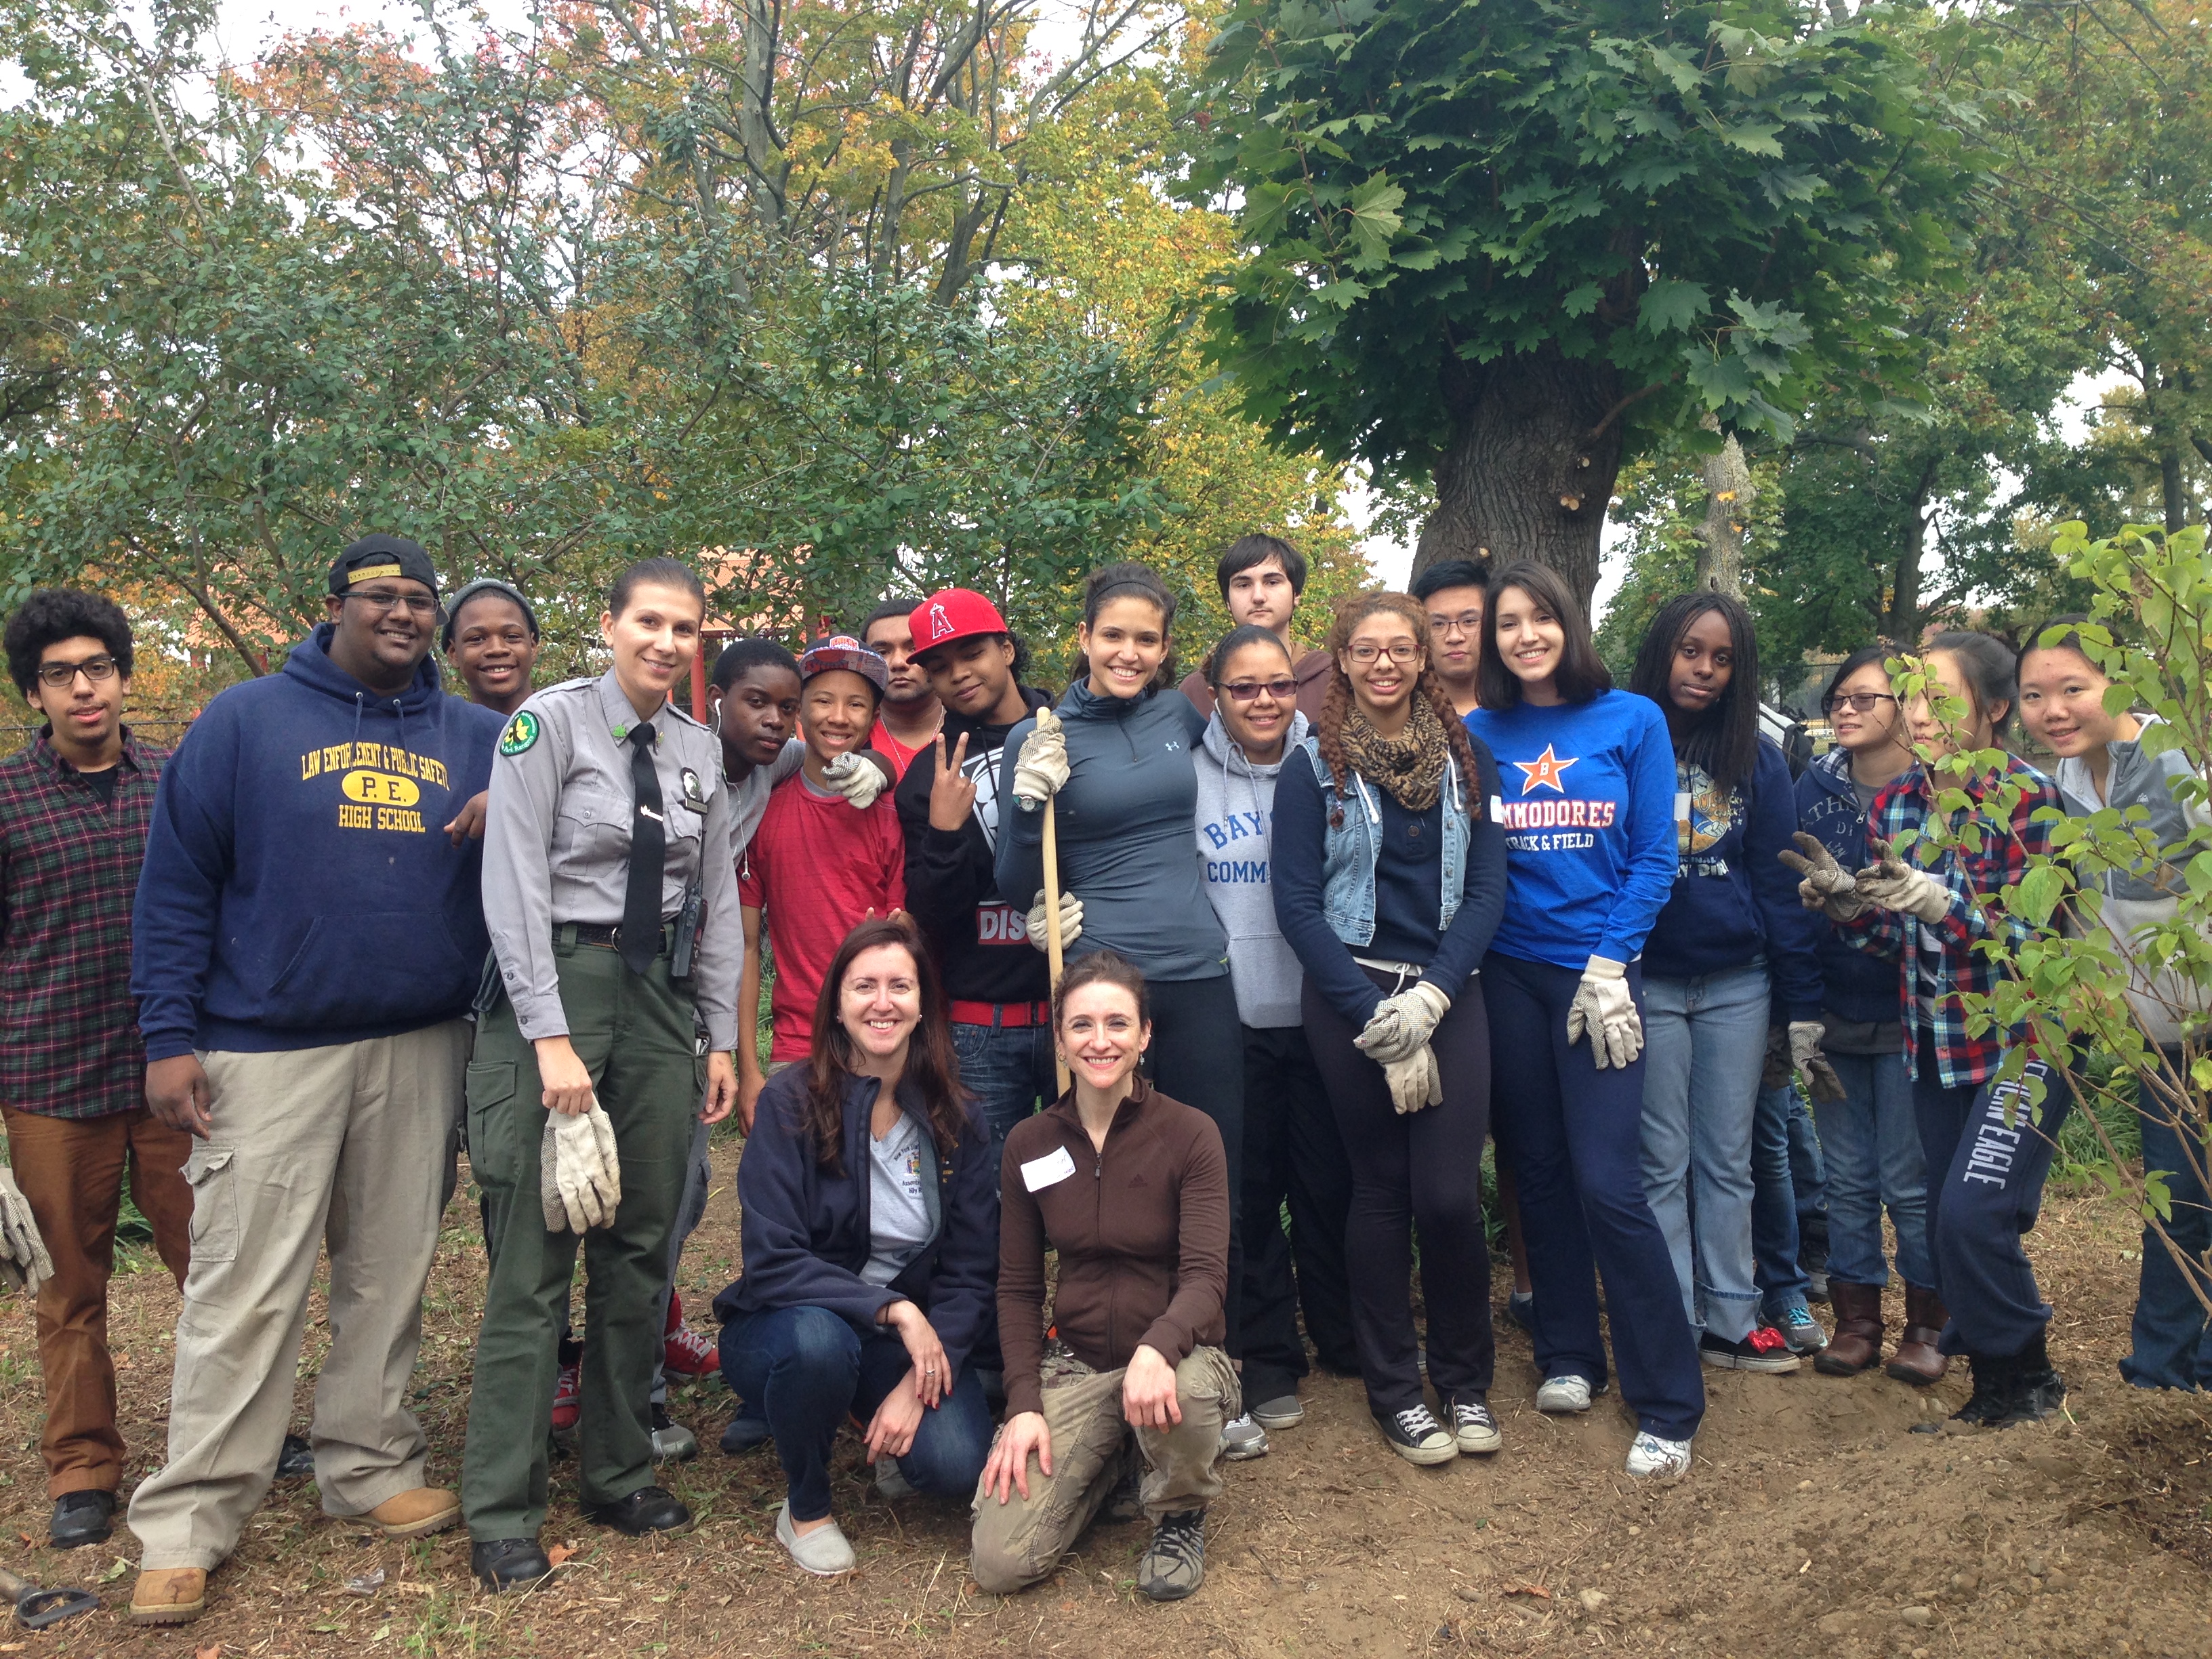 Assemblywoman Nily Rozic and local volunteers cleaned and beatified Cunningham Park in Fresh Meadows.